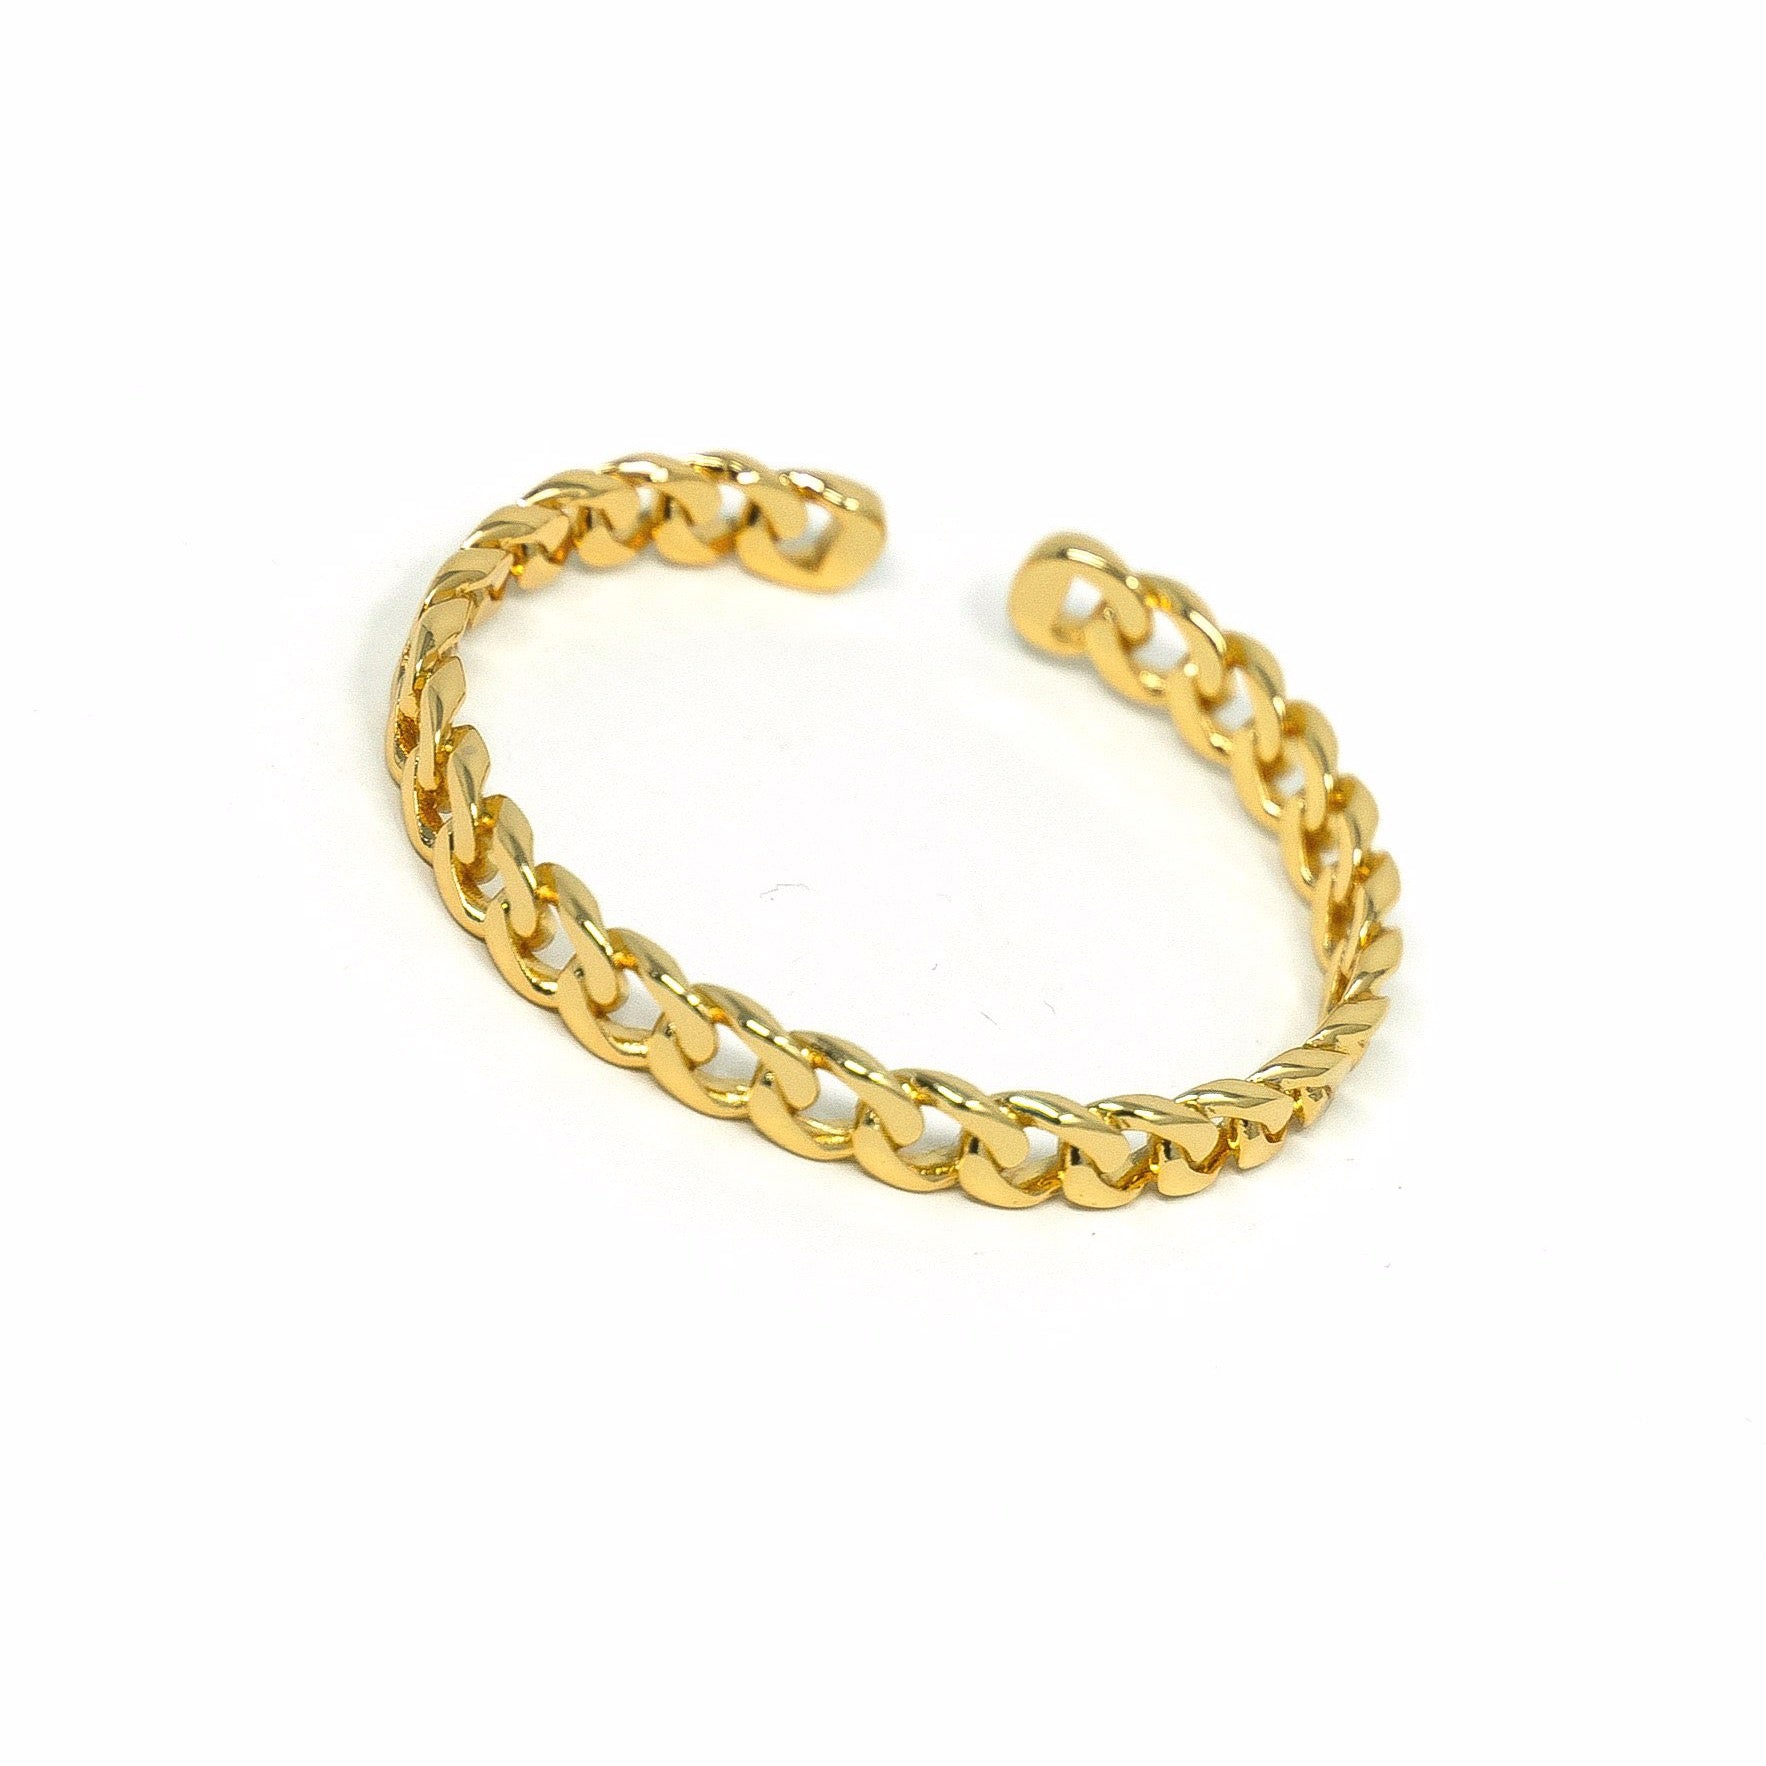 Gold Chain Link Cuff JEWELRY The Sis Kiss Gold Curb Chain